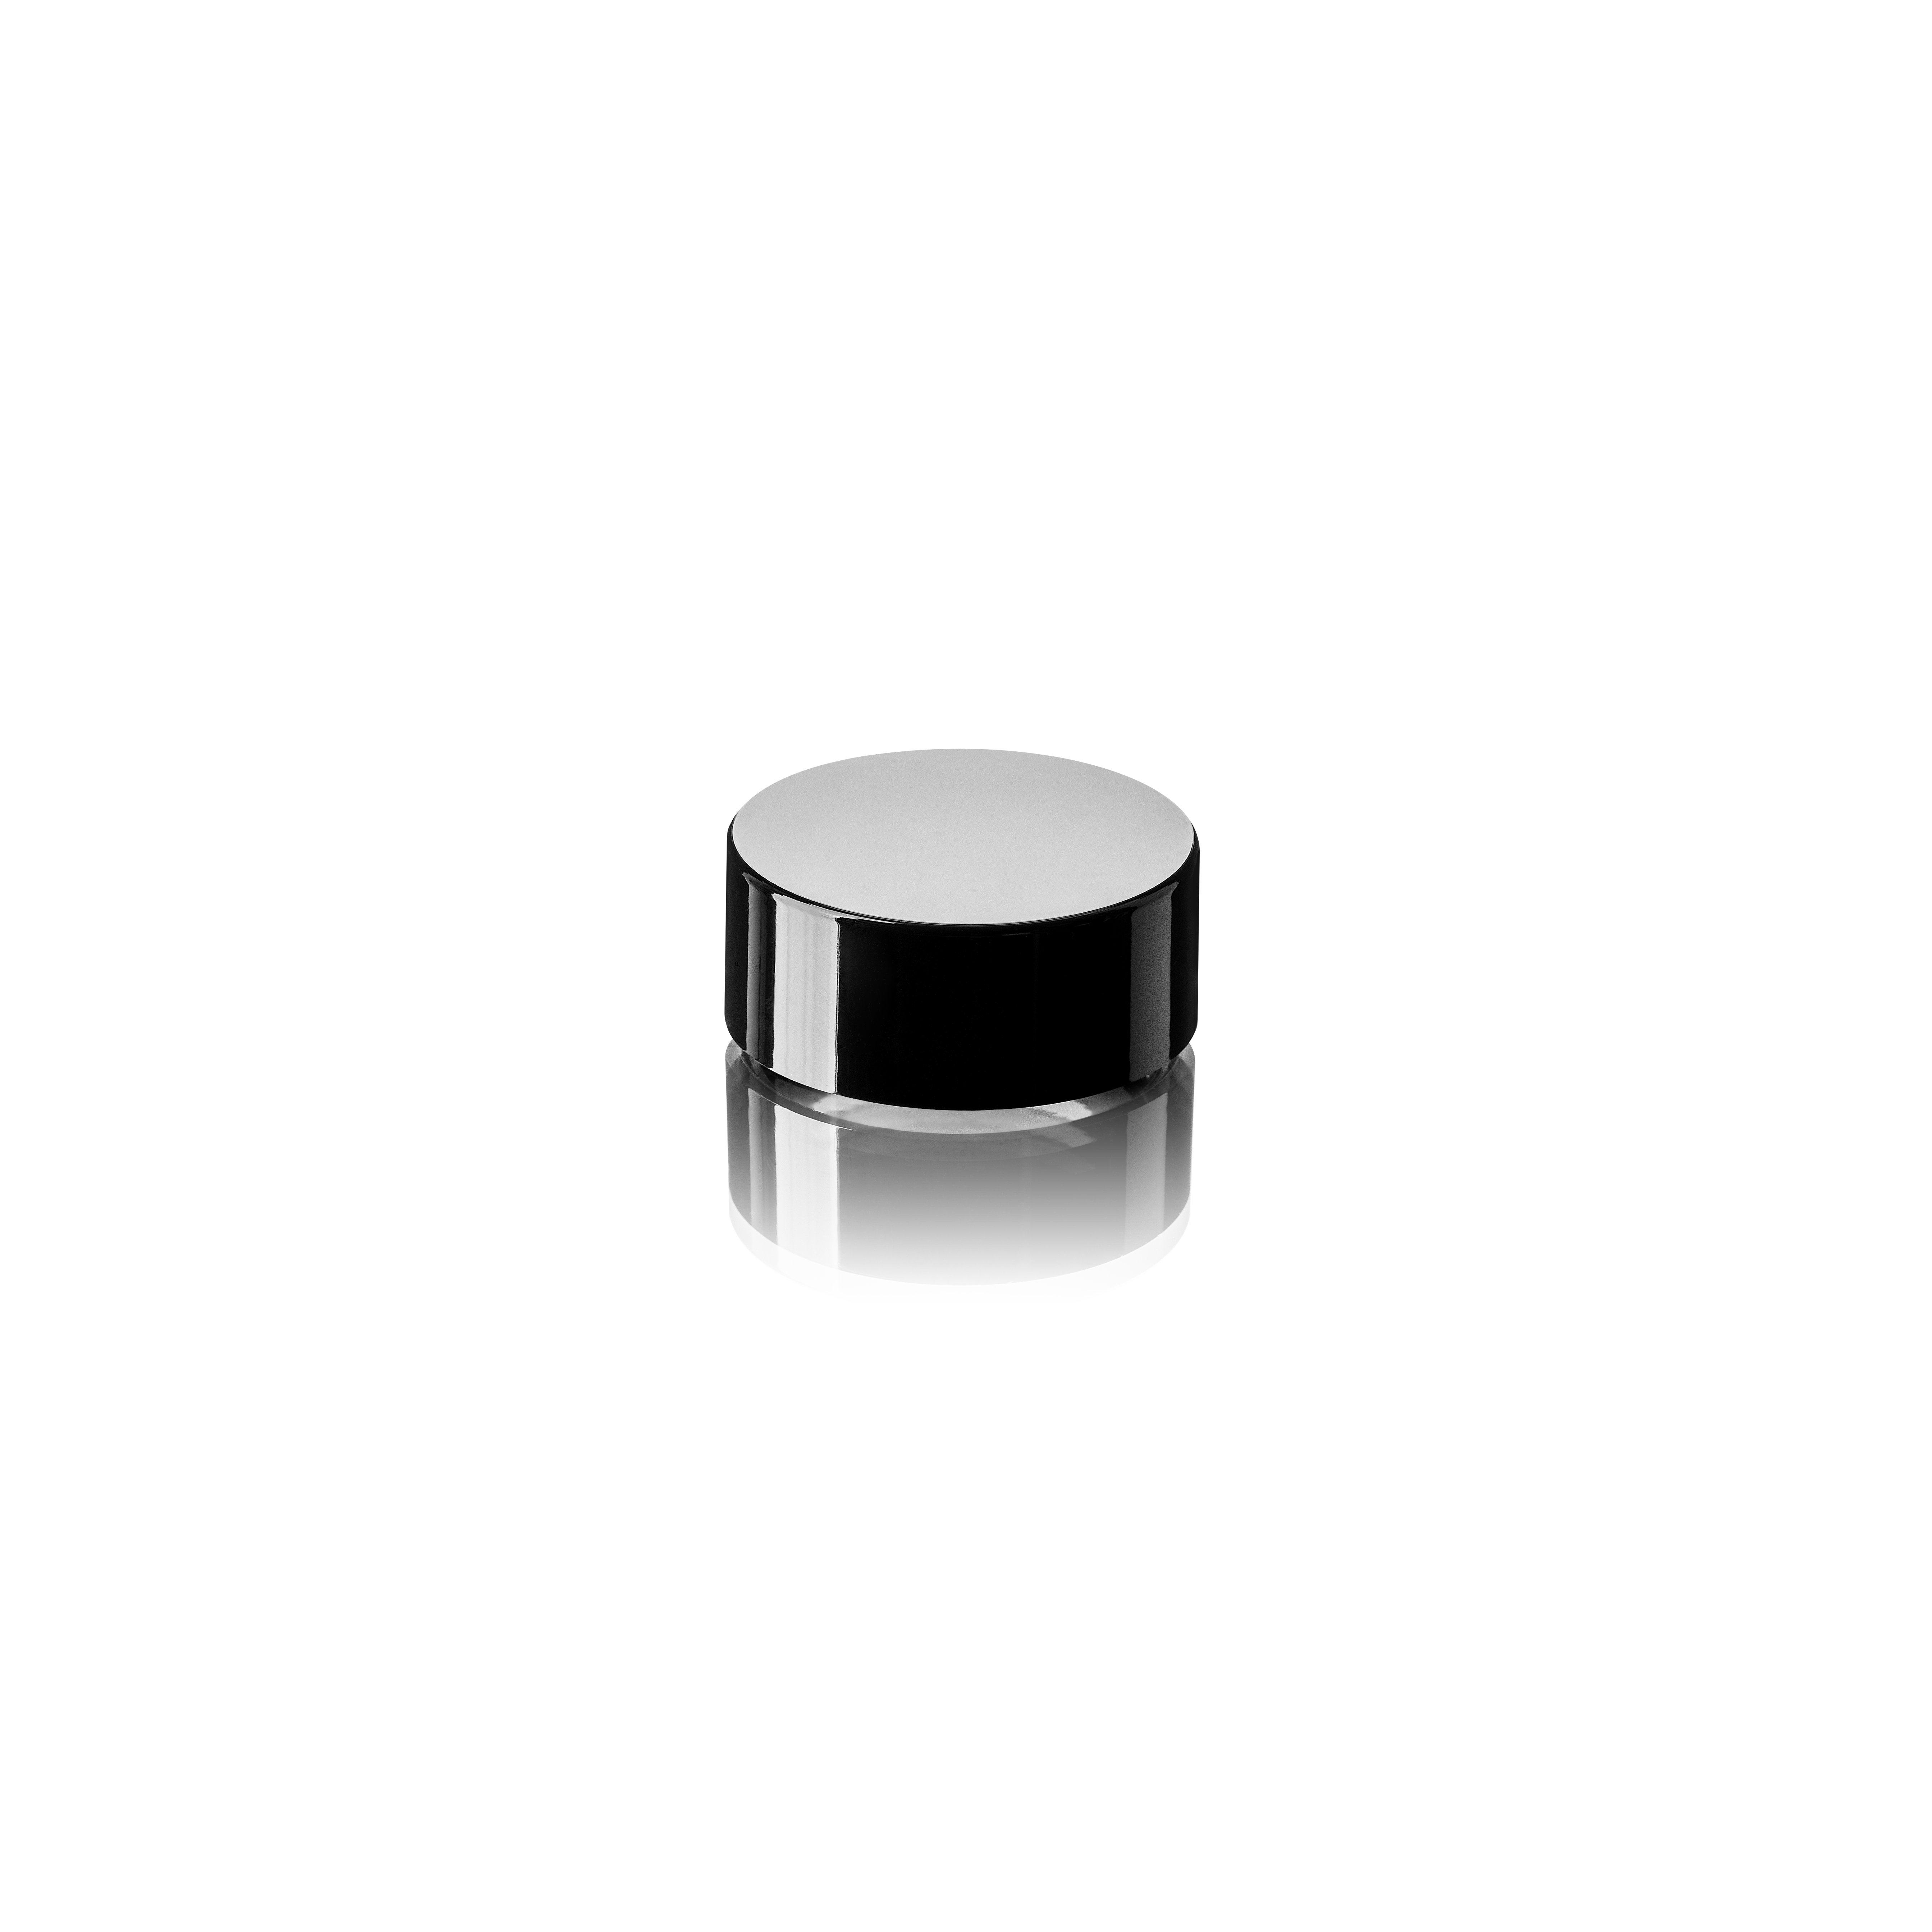 Child-resistant lid Modern 35 special, PP, black, glossy finish, white inlay (Camellia 15)